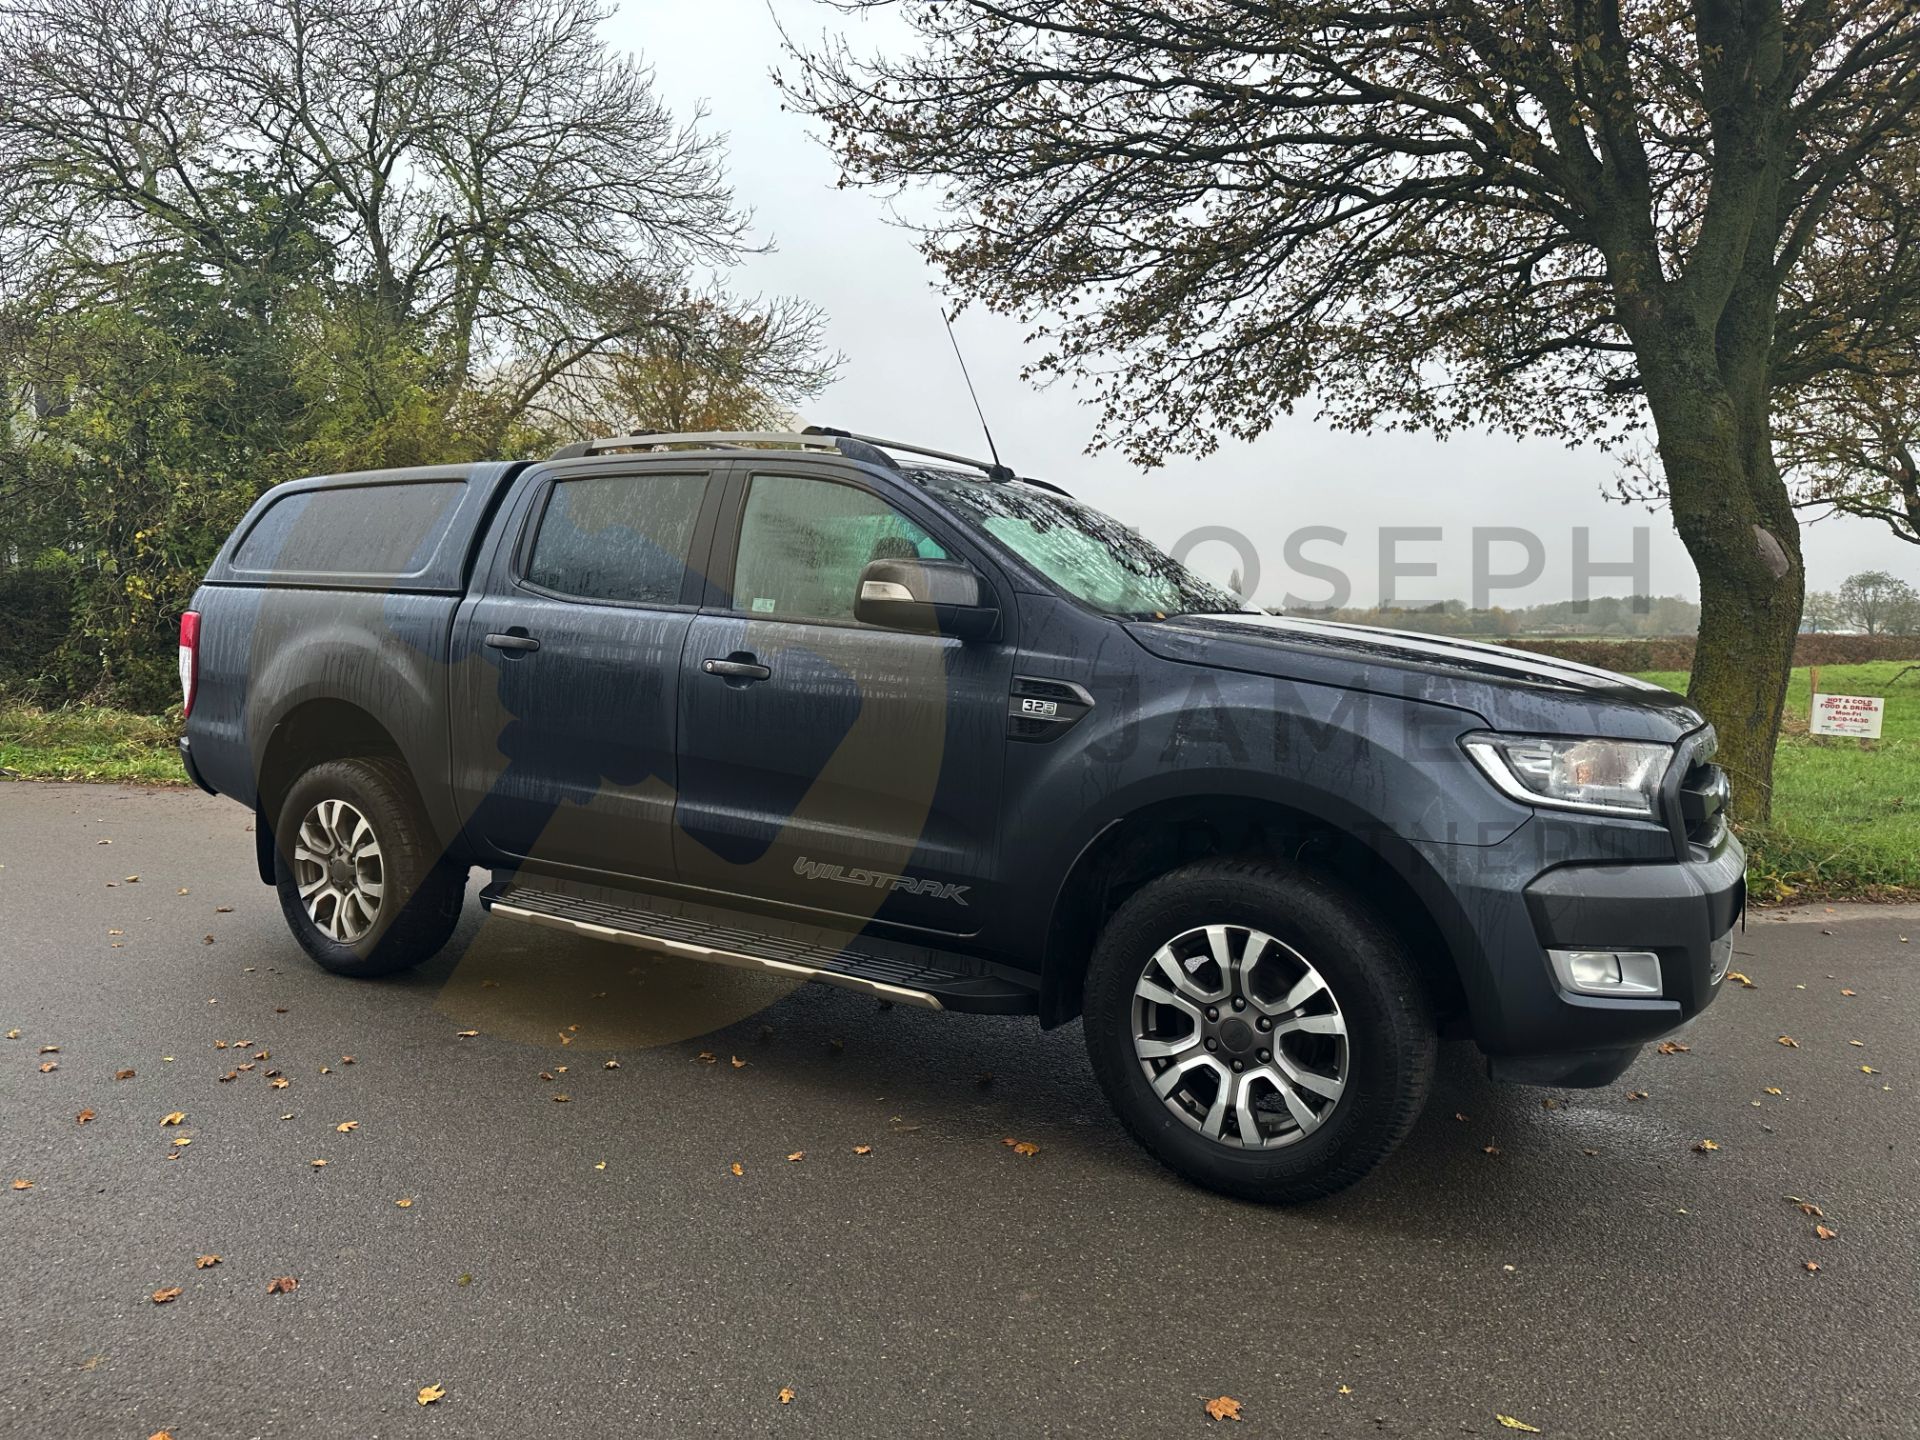 FORD RANGER *WILDTRAK EDITION* DOUBLE CAB PICK-UP (2019 - EURO 6) 3.2 TDCI - AUTOMATIC (1 OWNER) - Image 2 of 52